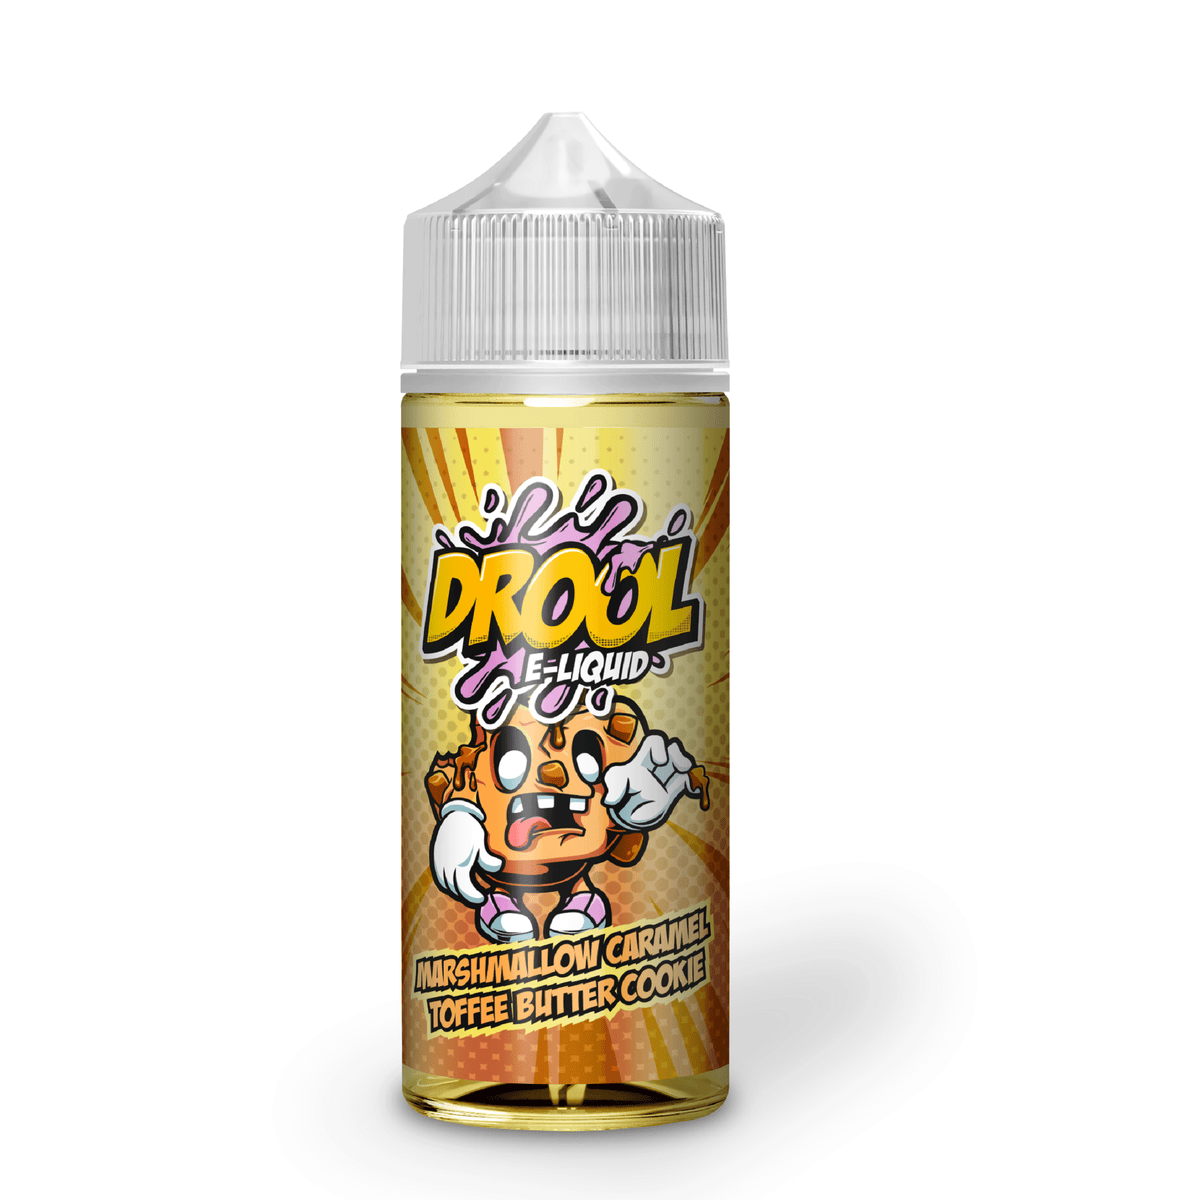 Drool Marshmallow, Caramel, Toffee Butter Cookie 120ML